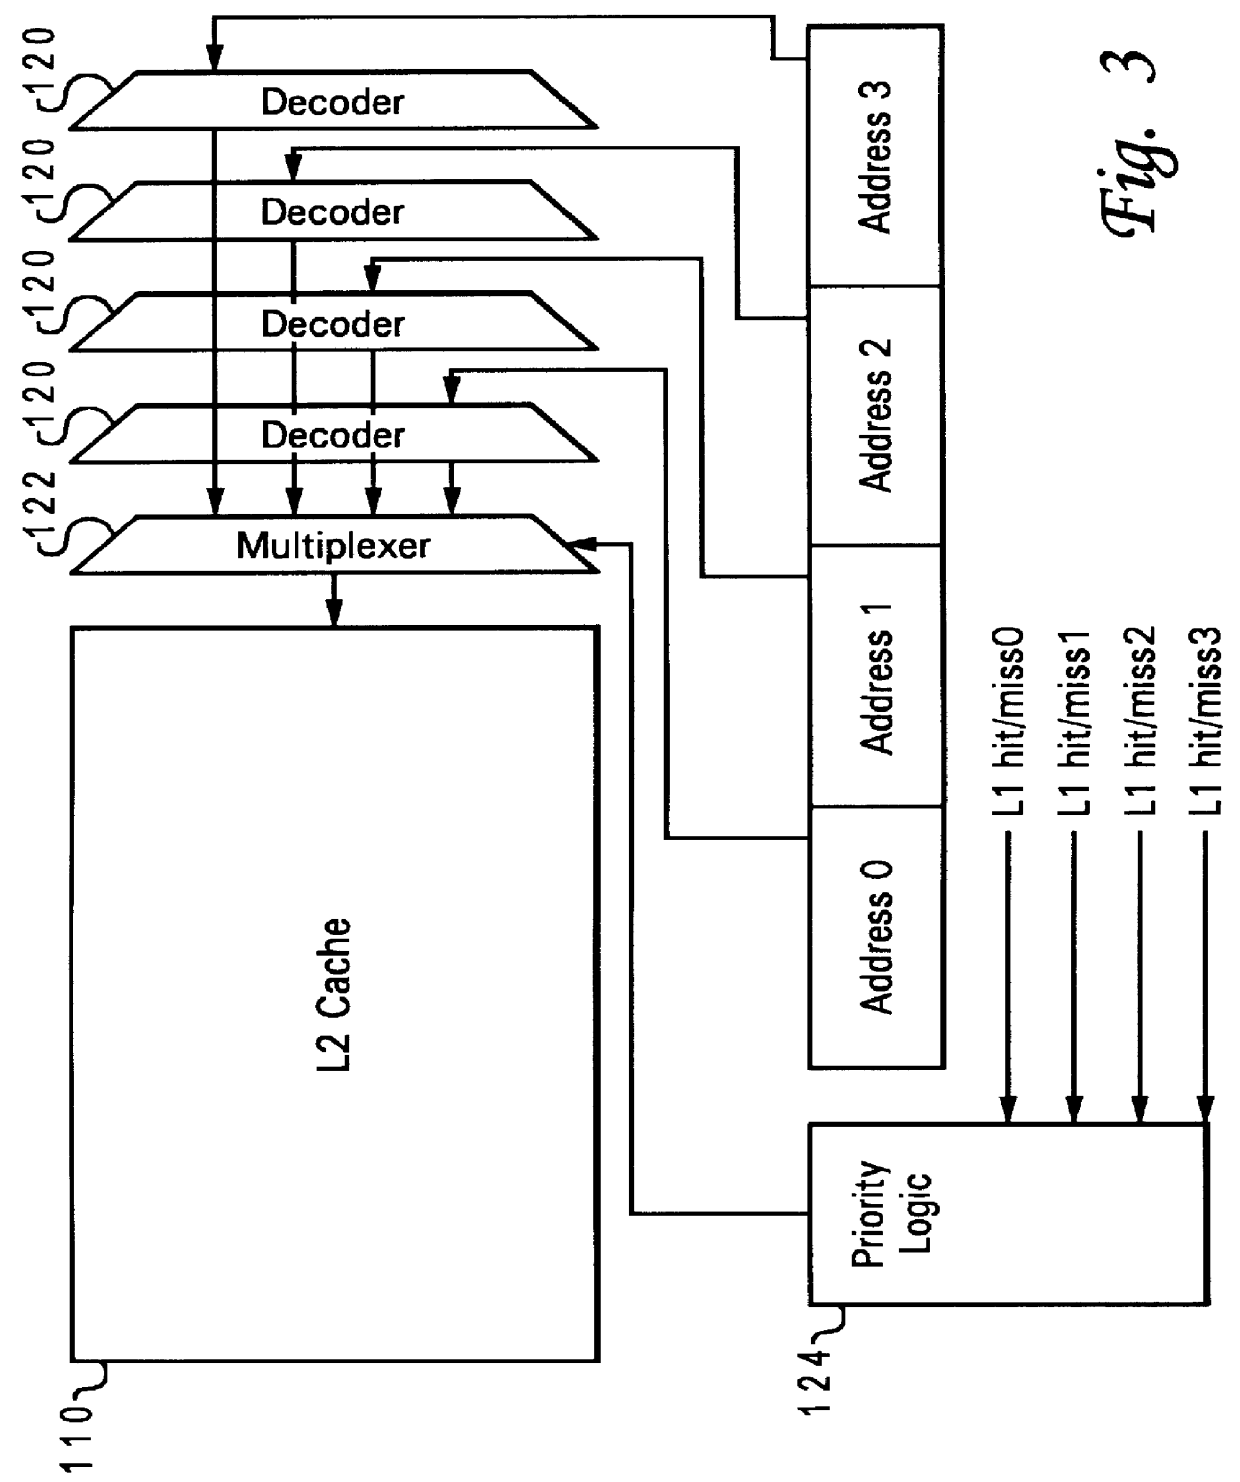 Multiple level cache memory with overlapped L1 and L2 memory access